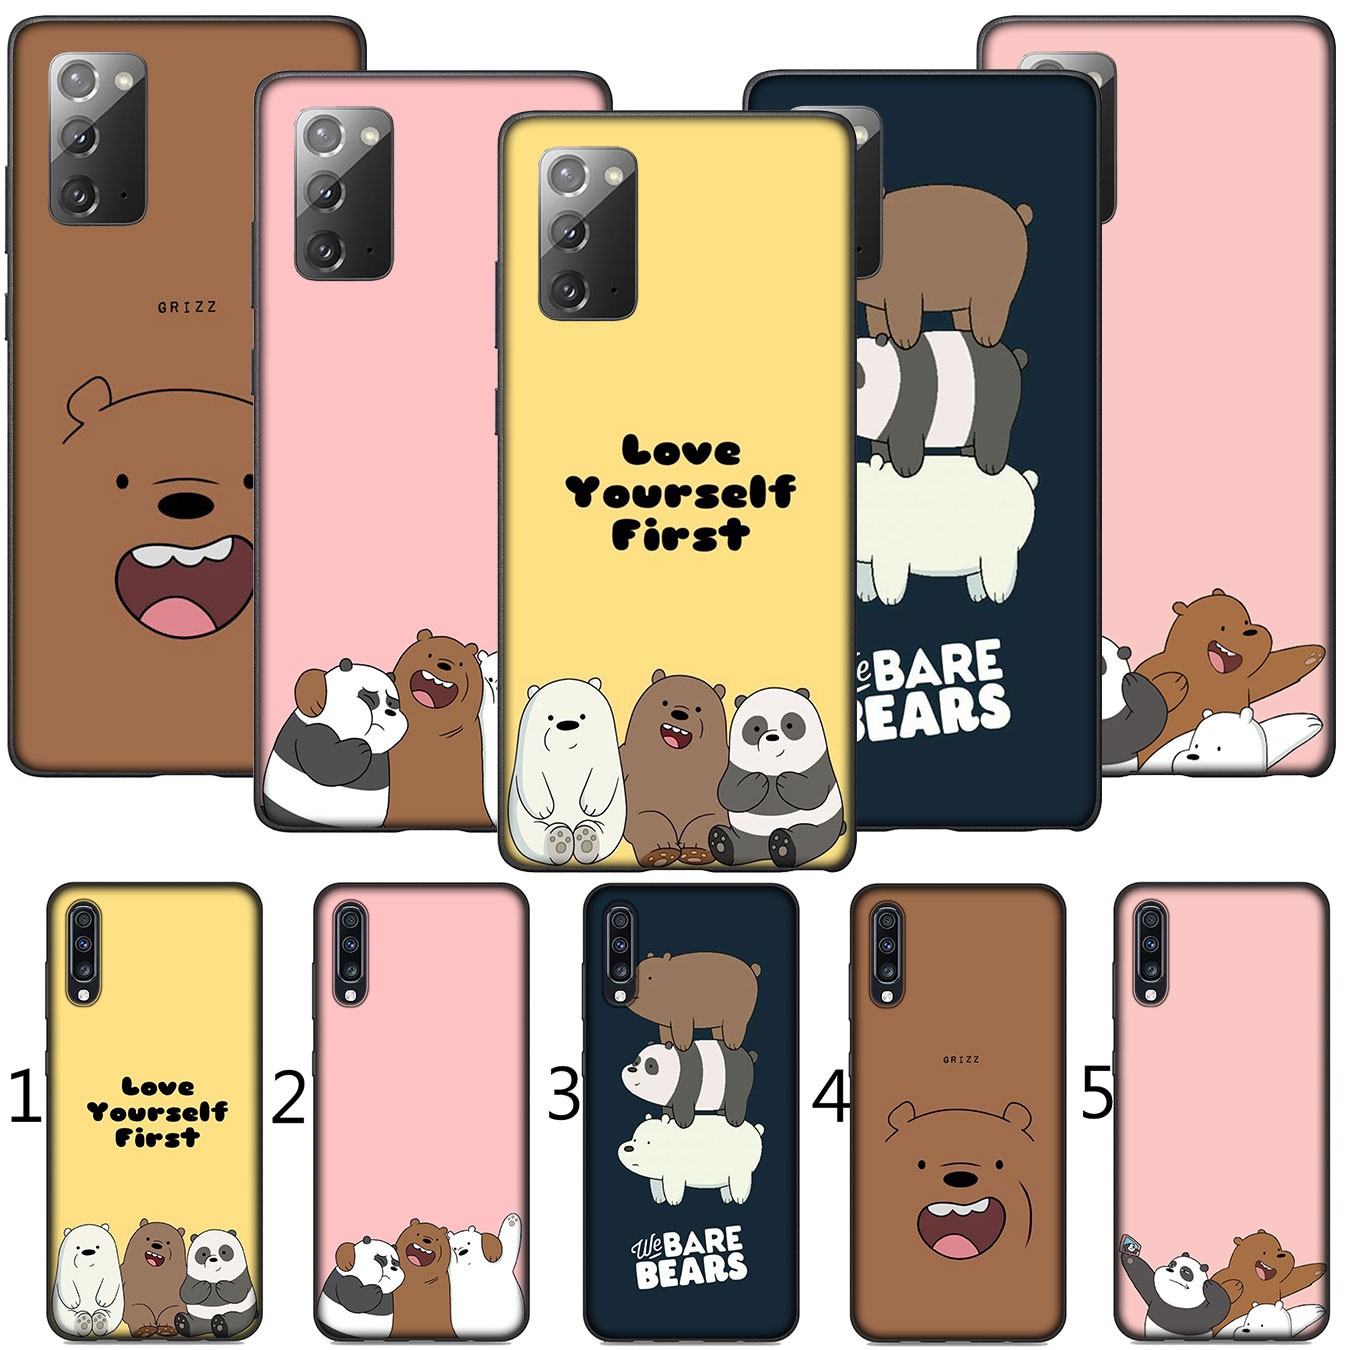 Samsung Galaxy A02S J2 J4 J5 J6 Plus J7 Prime A02 M02 j6+ A42 + Casing Soft Silicone Phone Case H23 Comic We Bare Bears Cover